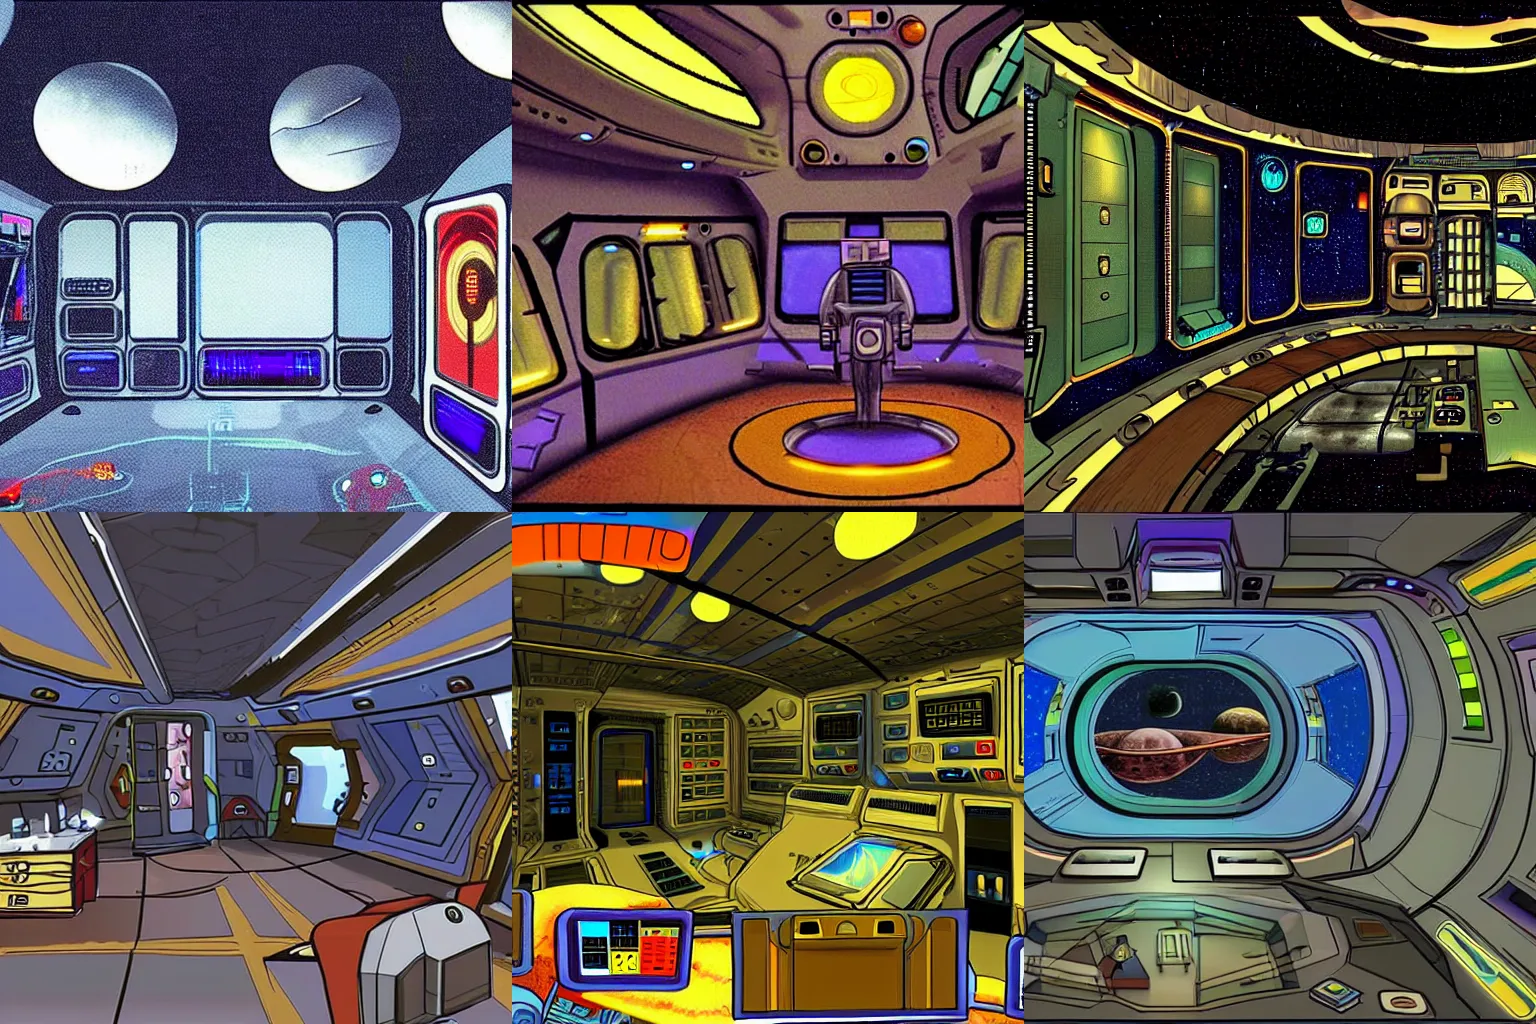 Prompt: inside a spaceship, from a space themed point and click 2D graphic adventure game, made in 1999